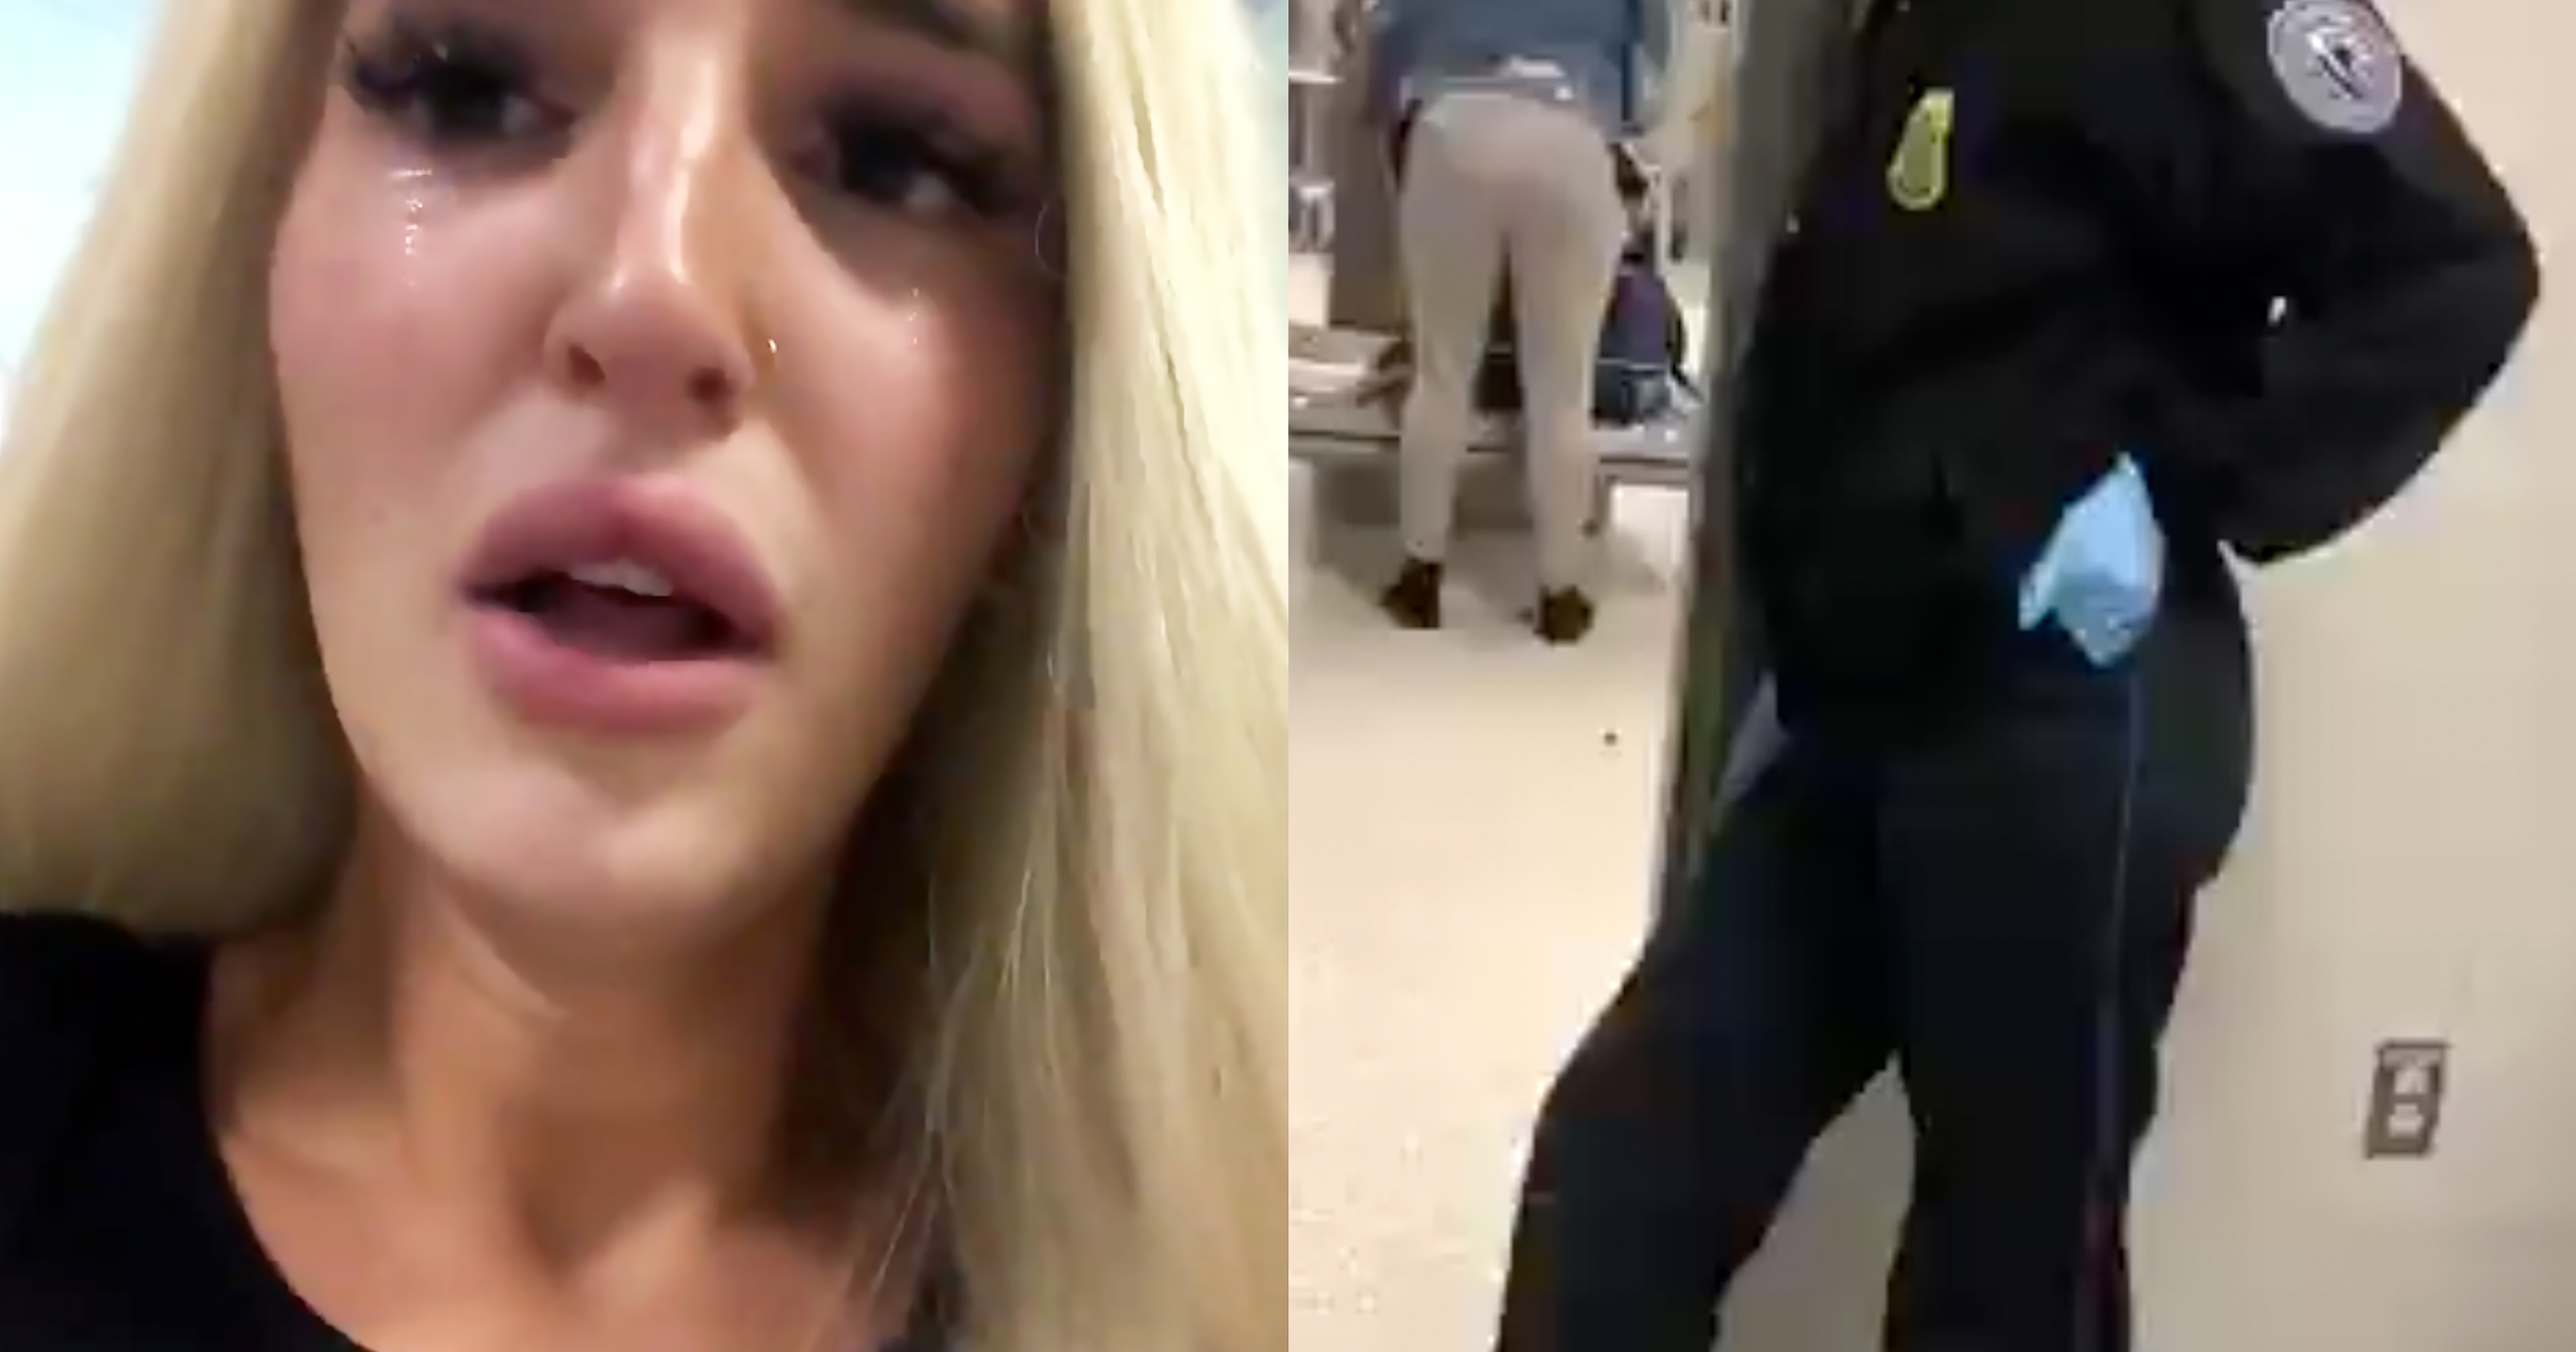 Left: close up of the trans woman crying. Right: airport security staff